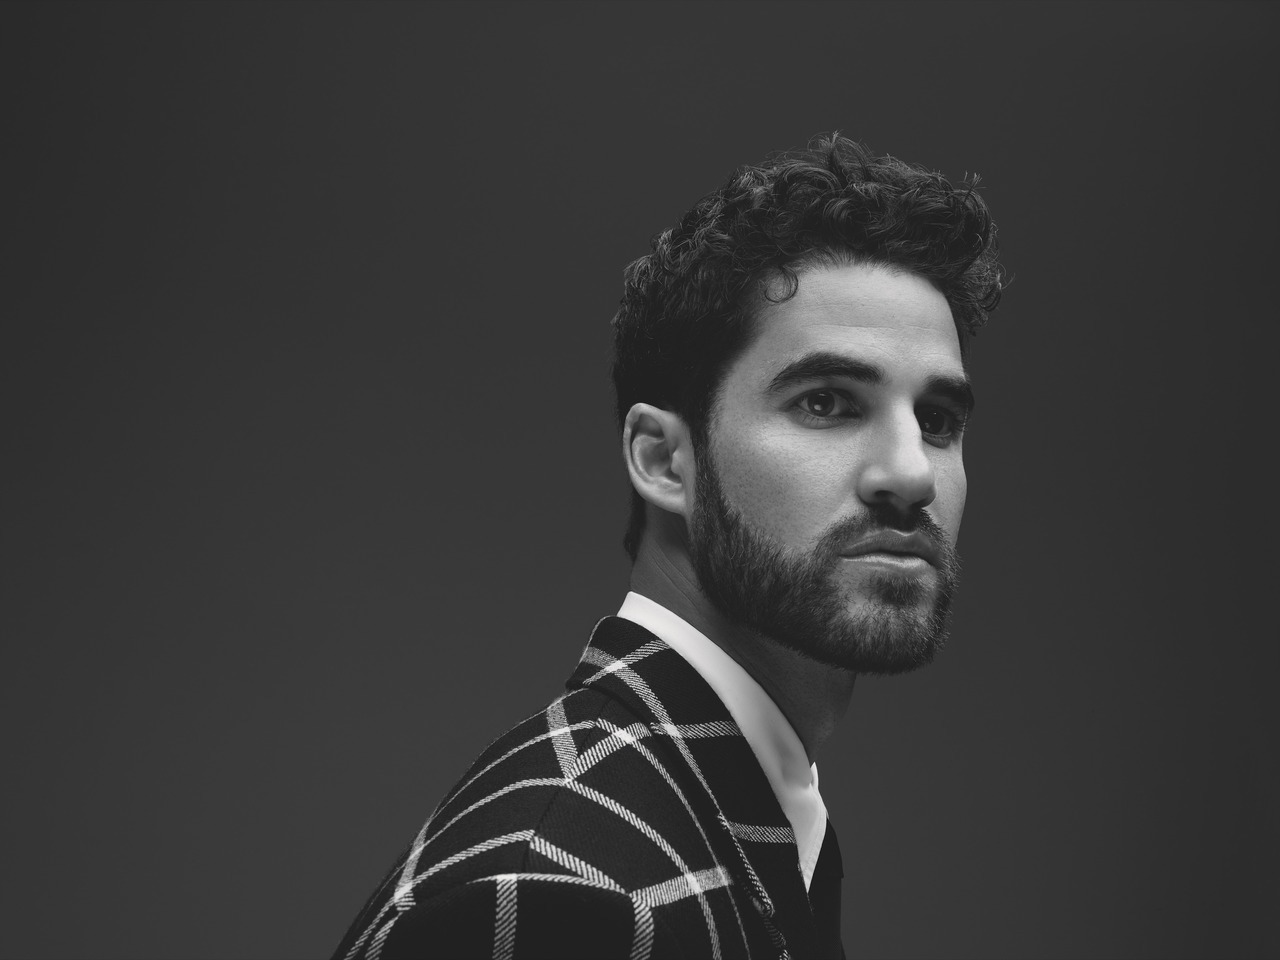 dc-warehouse:[UHQ] DARREN CRISS ON FANTASY, FAME AND THE FUTURE | Source